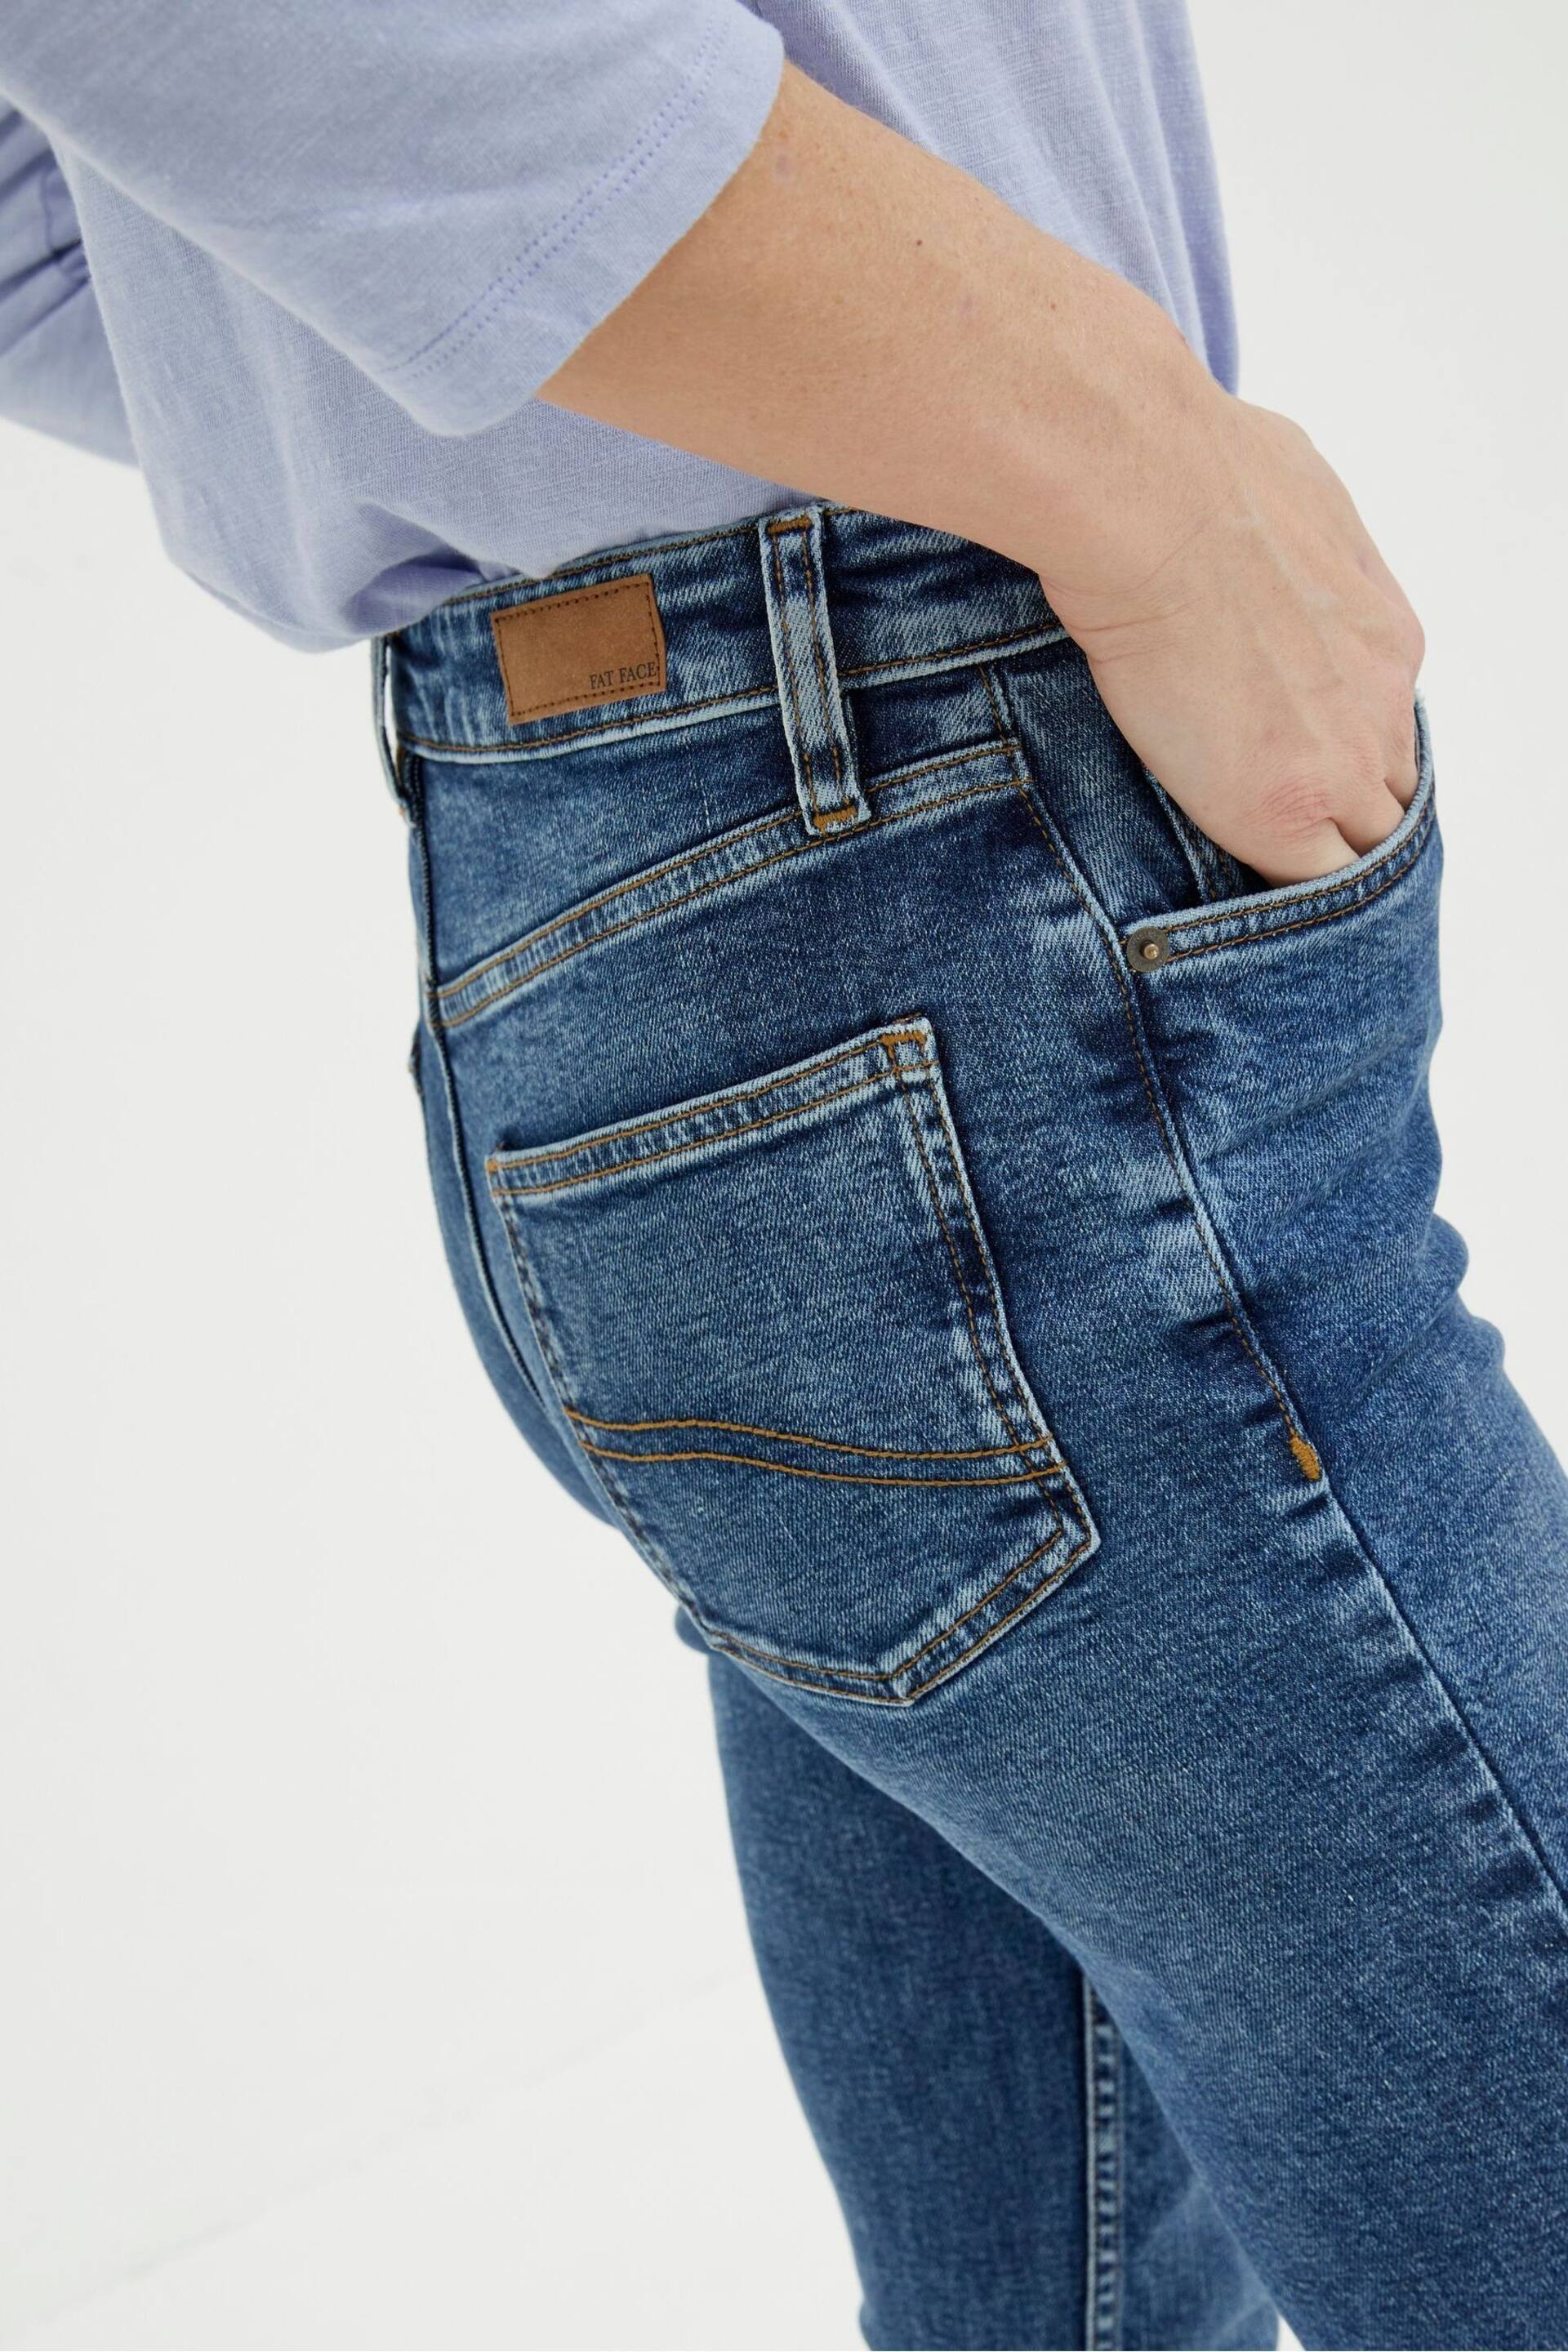 FatFace Blue Sway Slim Jeans - Image 2 of 5